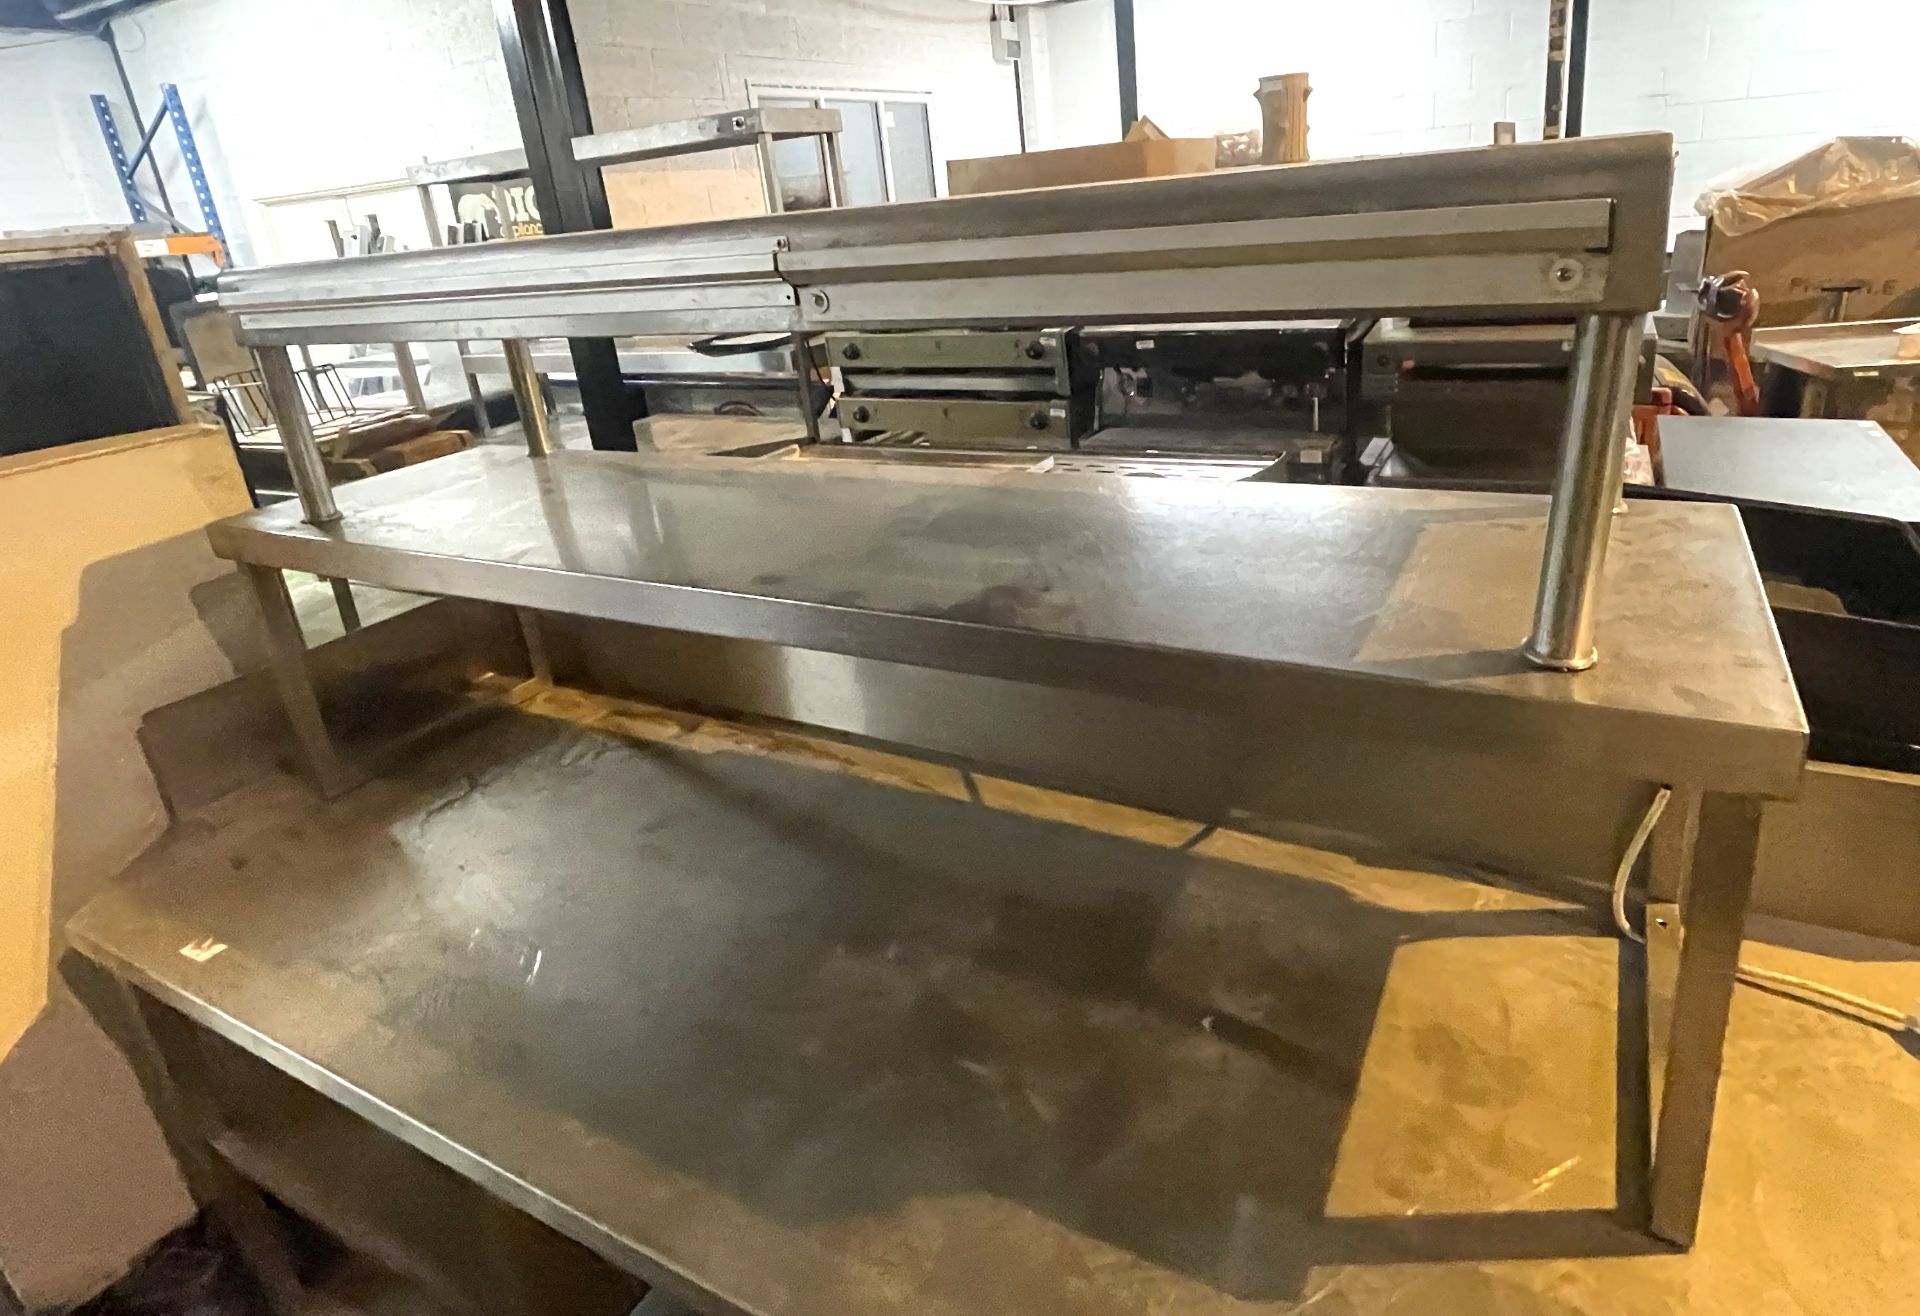 1 x Two Tier Countertop Heated Gantry Passthrough Shelf With Ticket Rails - Image 4 of 6